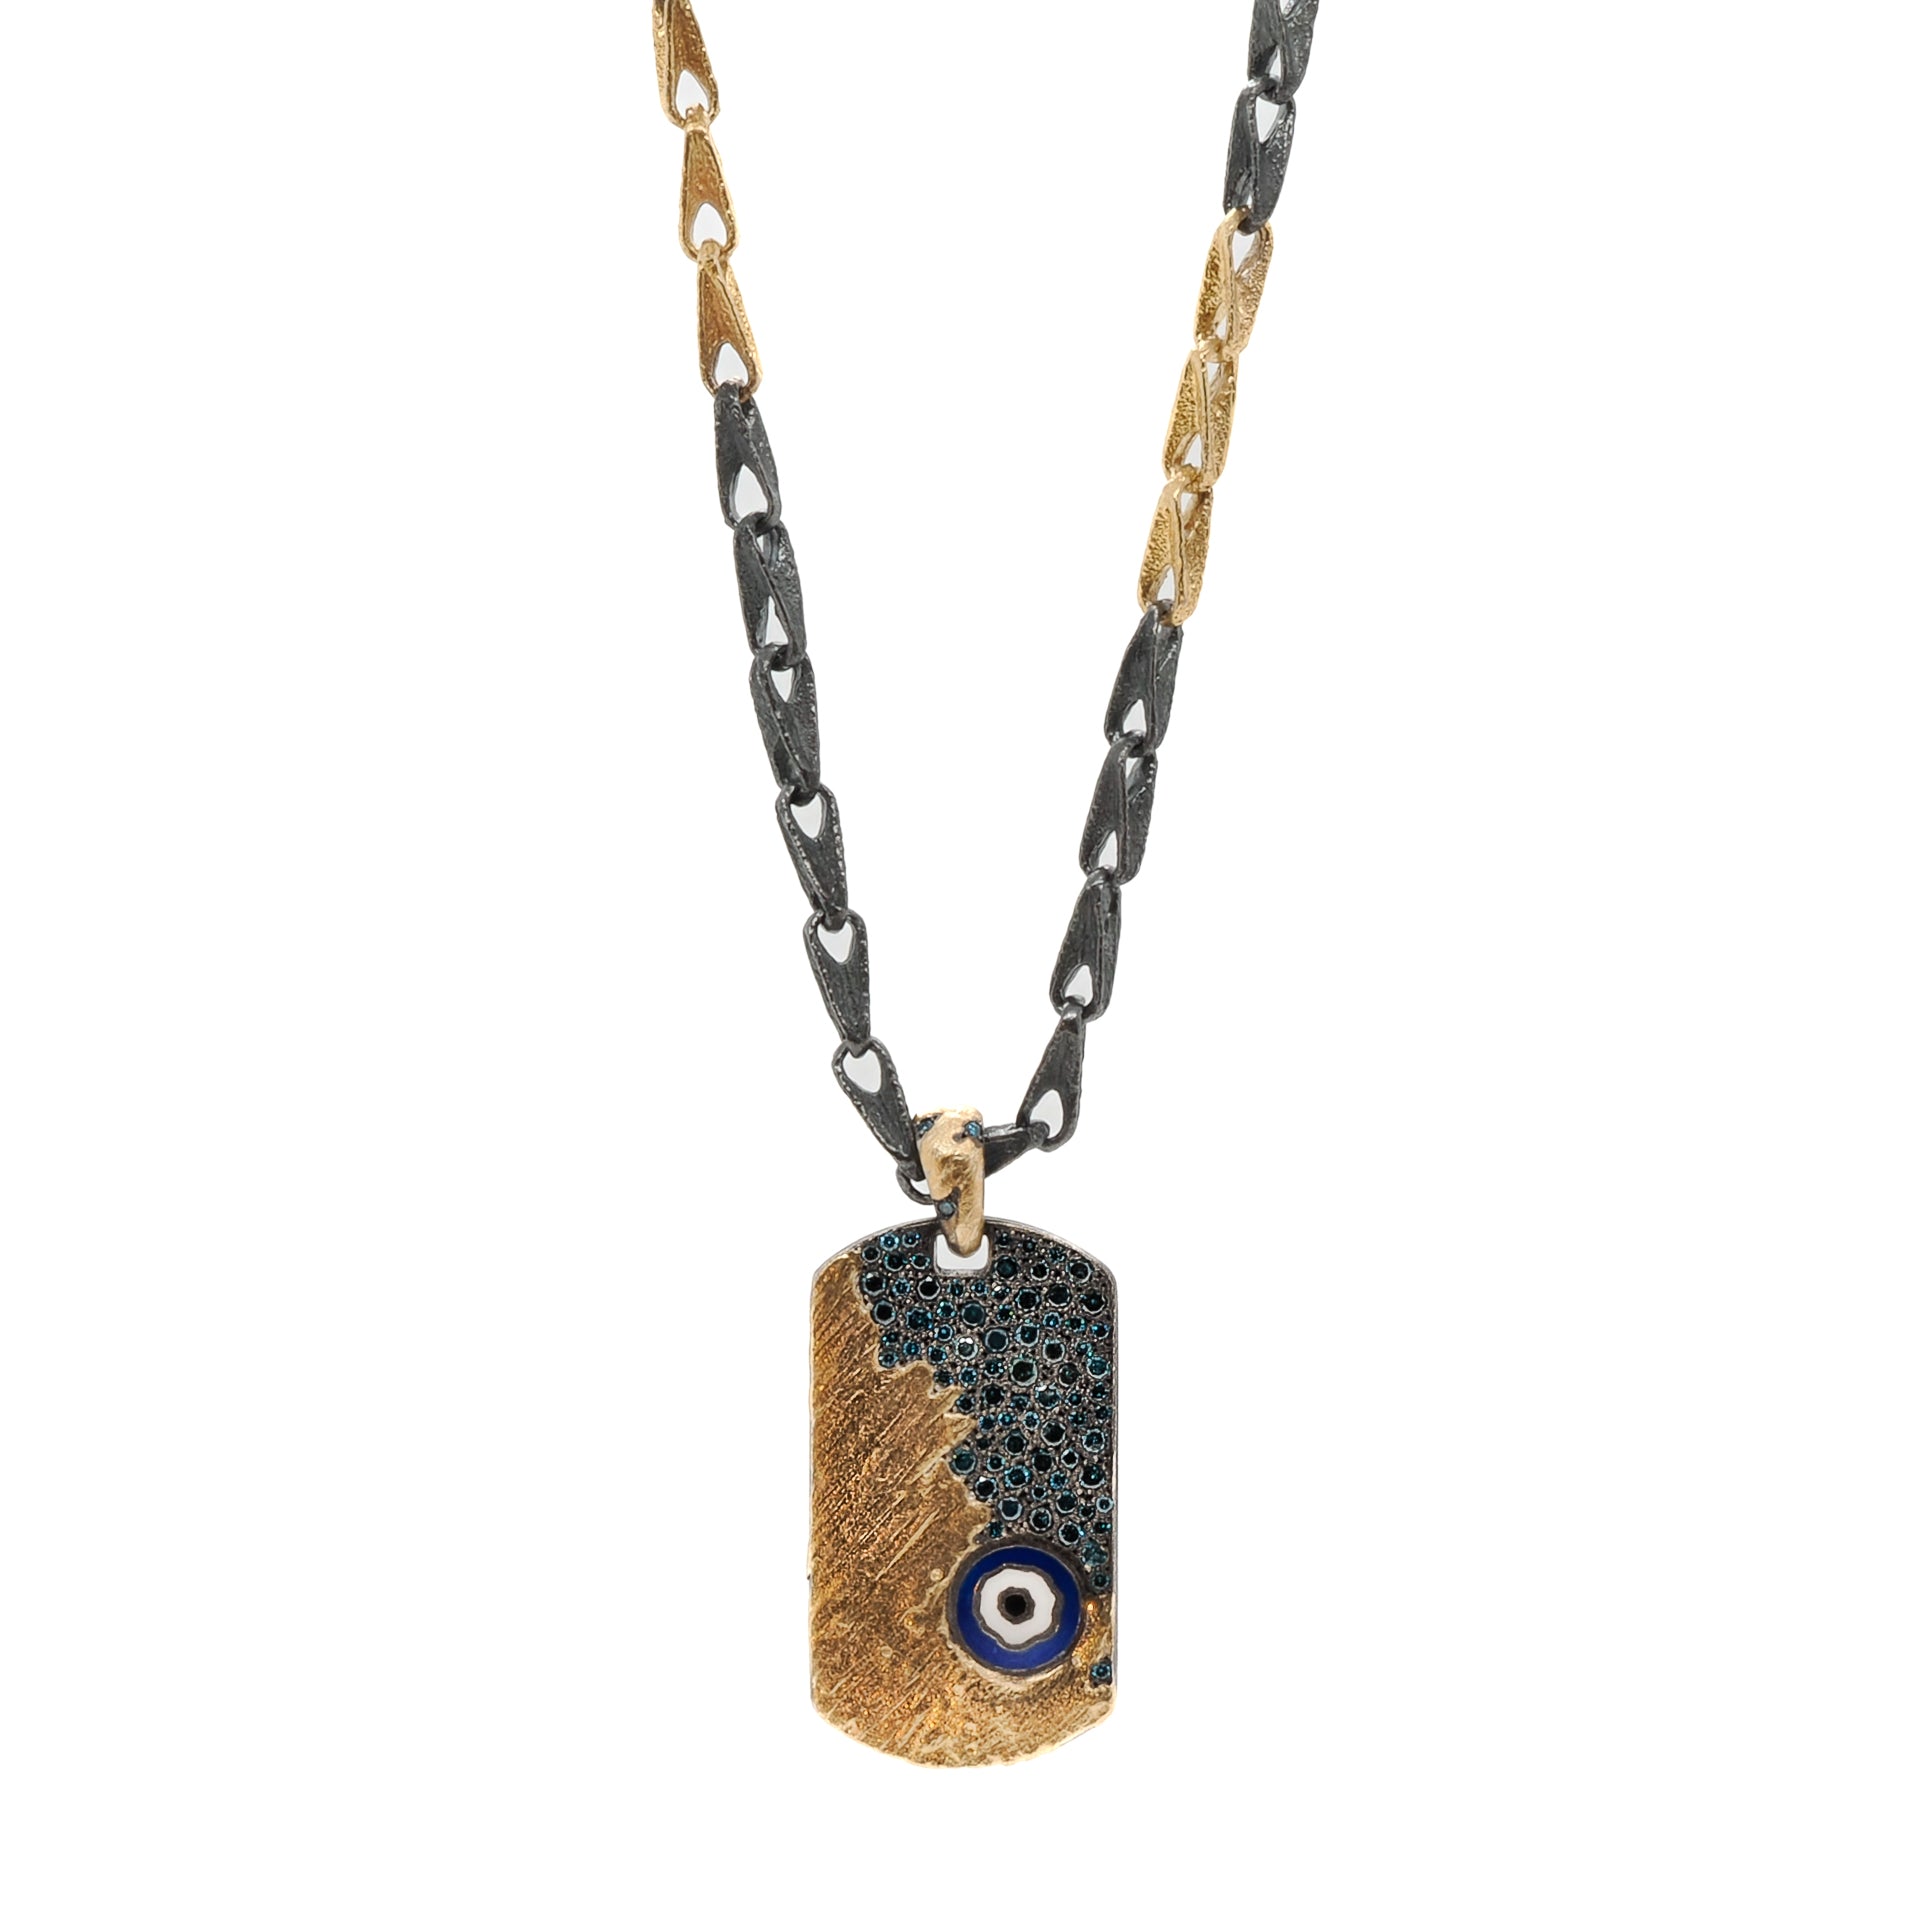 Nature Dog Tag Evil Eye Necklace featuring a unique handmade design crafted with a 21k gold over silver surface and adorned with 1.35 carats of petroleum diamonds.